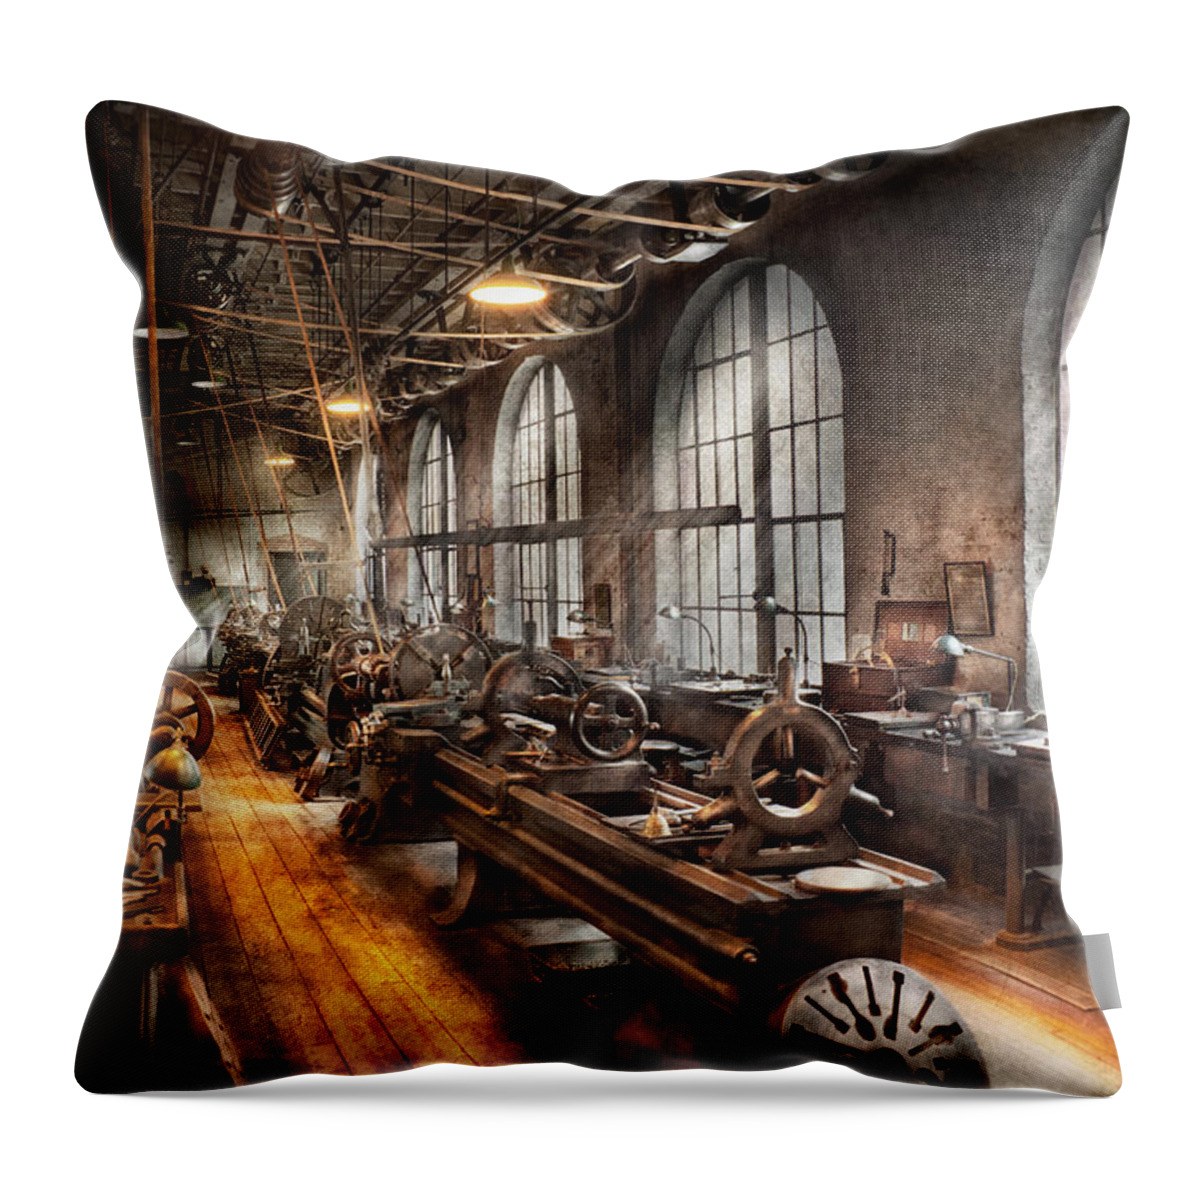 Hdr Throw Pillow featuring the photograph Machinist - A room full of Lathes by Mike Savad